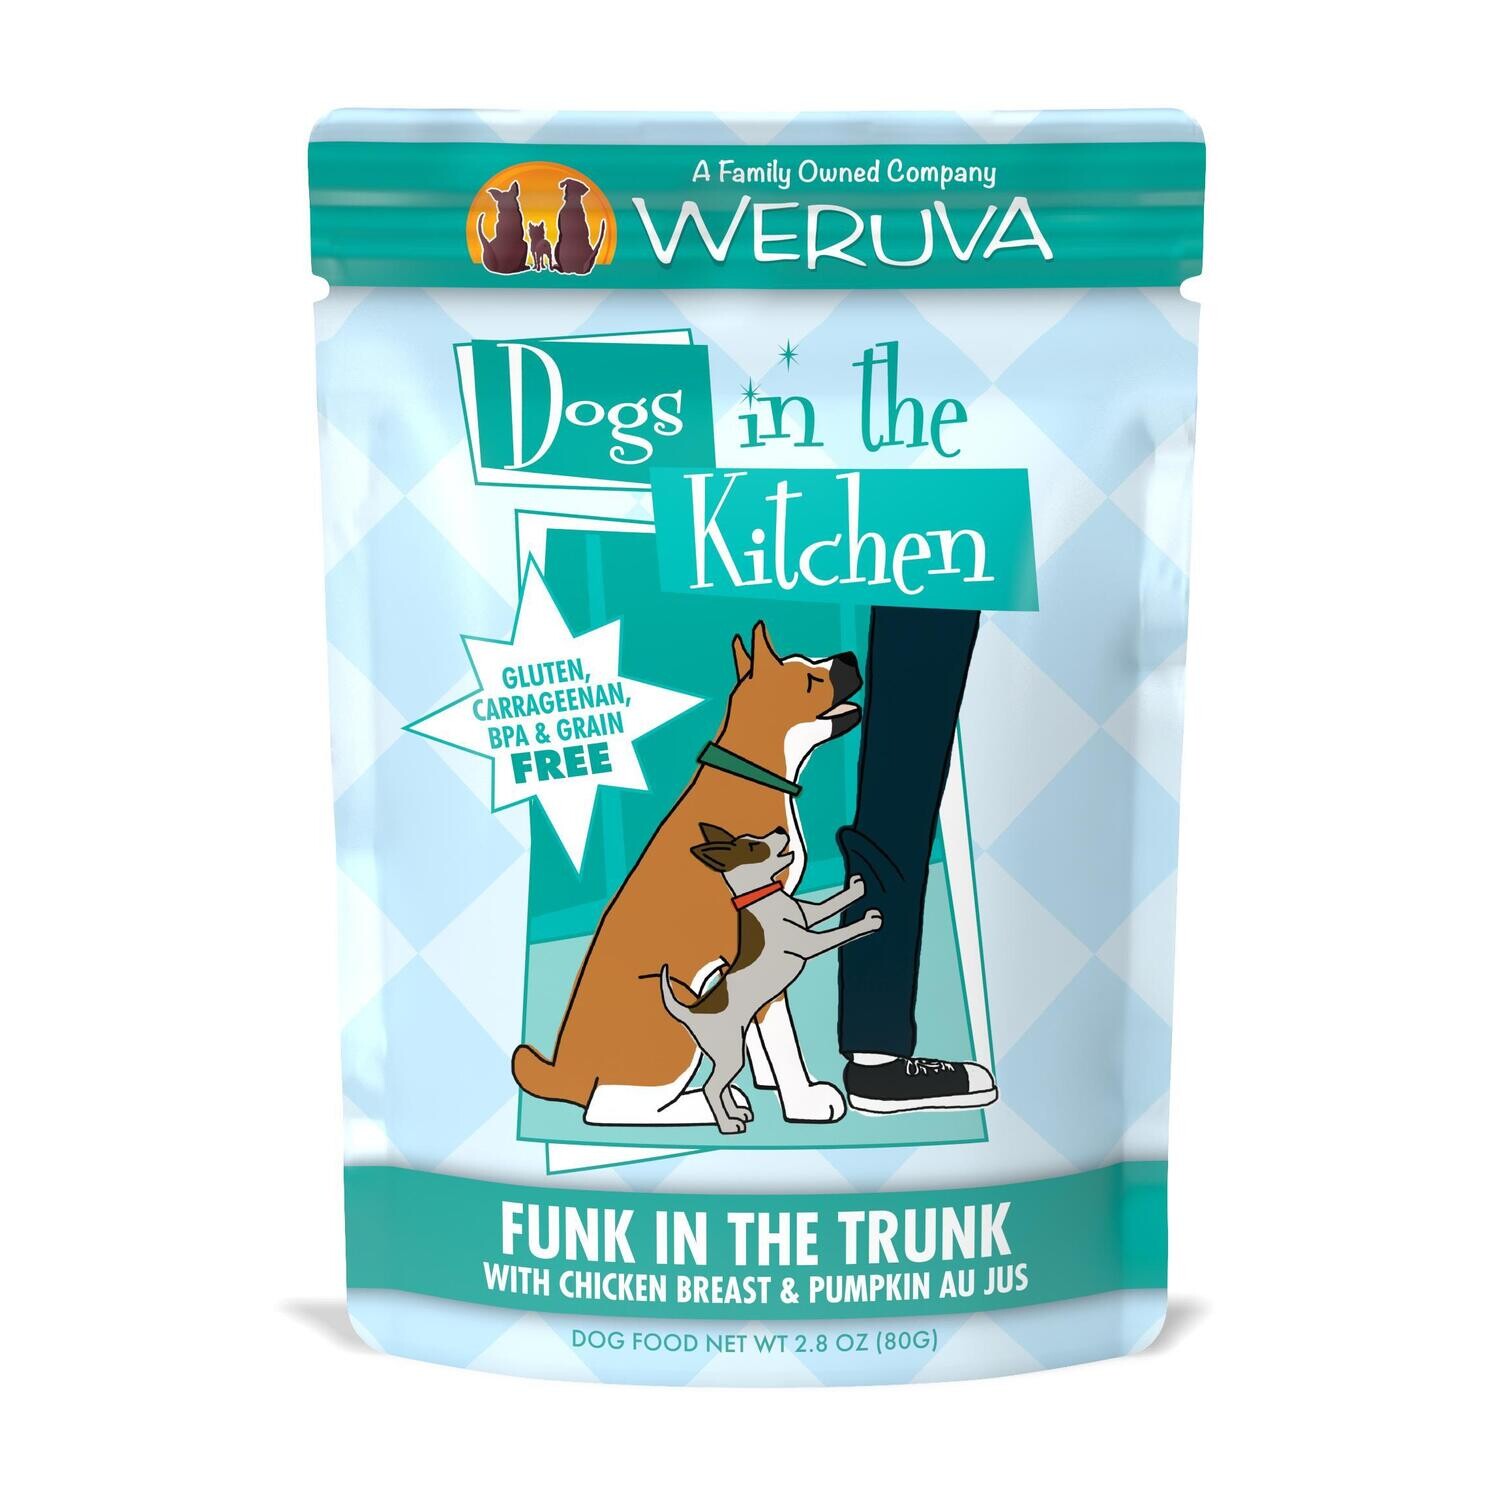 Weruva Dogs in the Kitchen Funk in the Trunk pouch 12/case